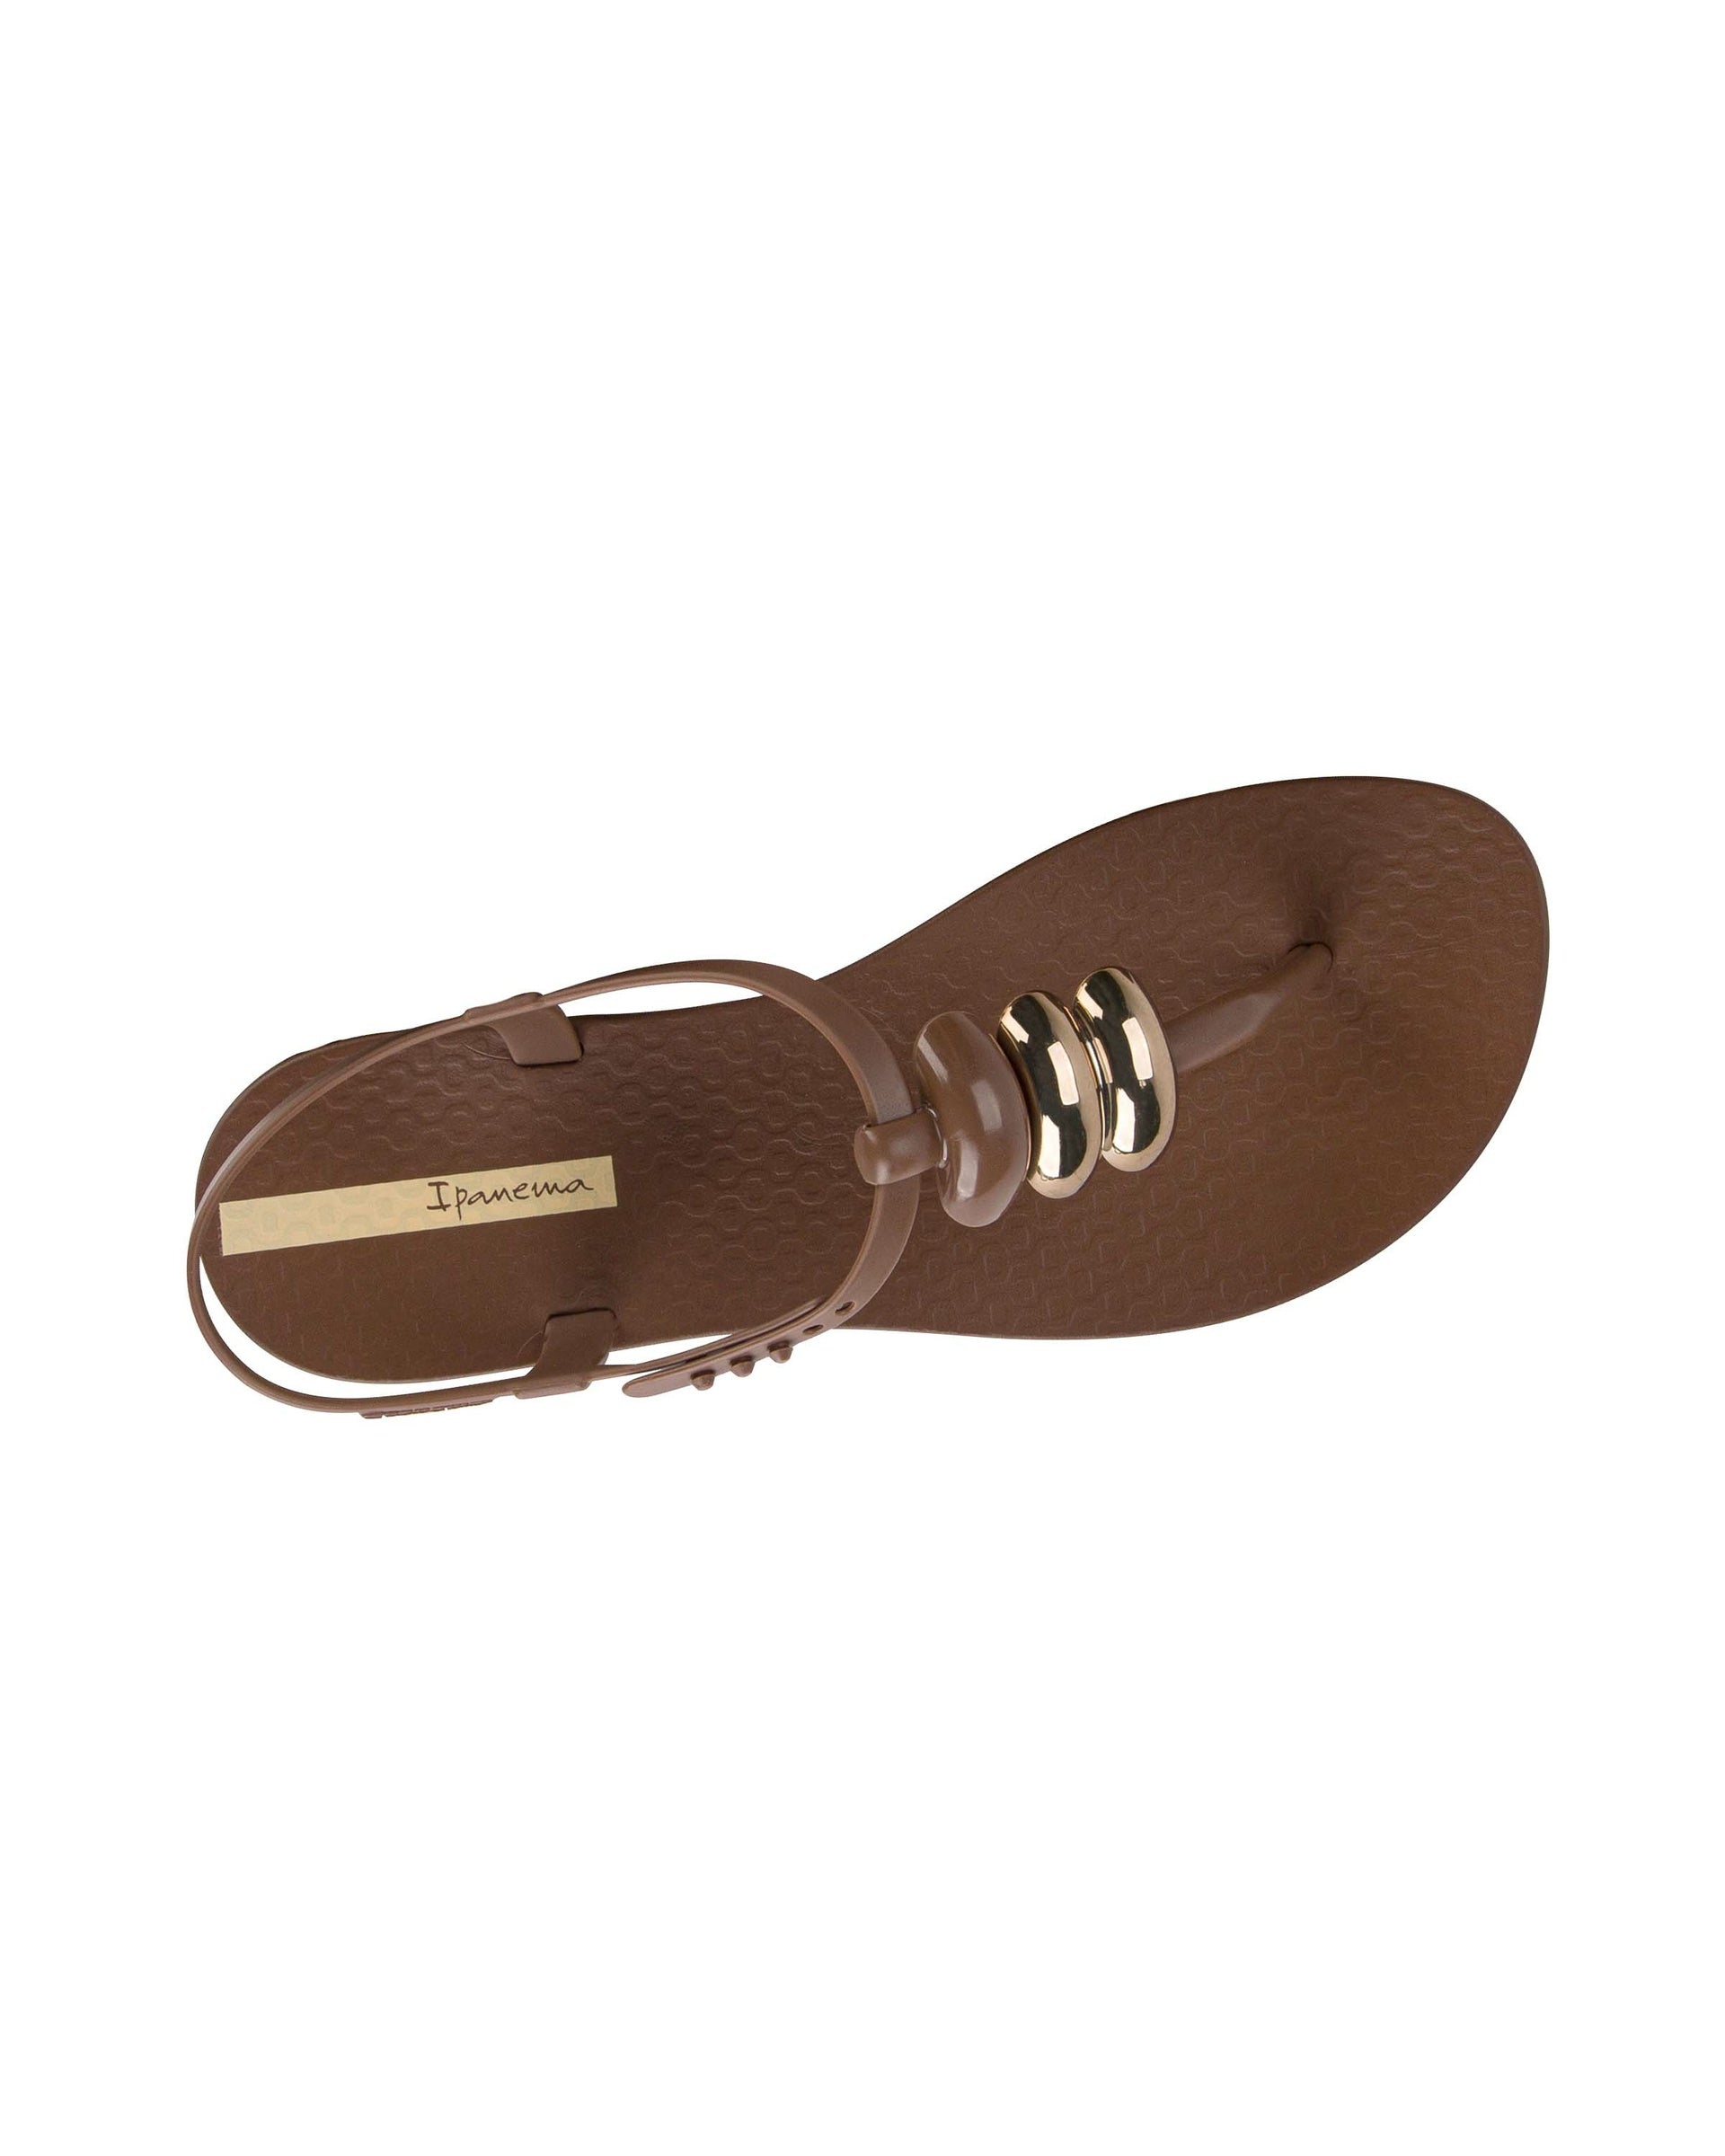 Top view of a brown Ipanema Class women's sandal with 3 bubble baubles on the t-strap.